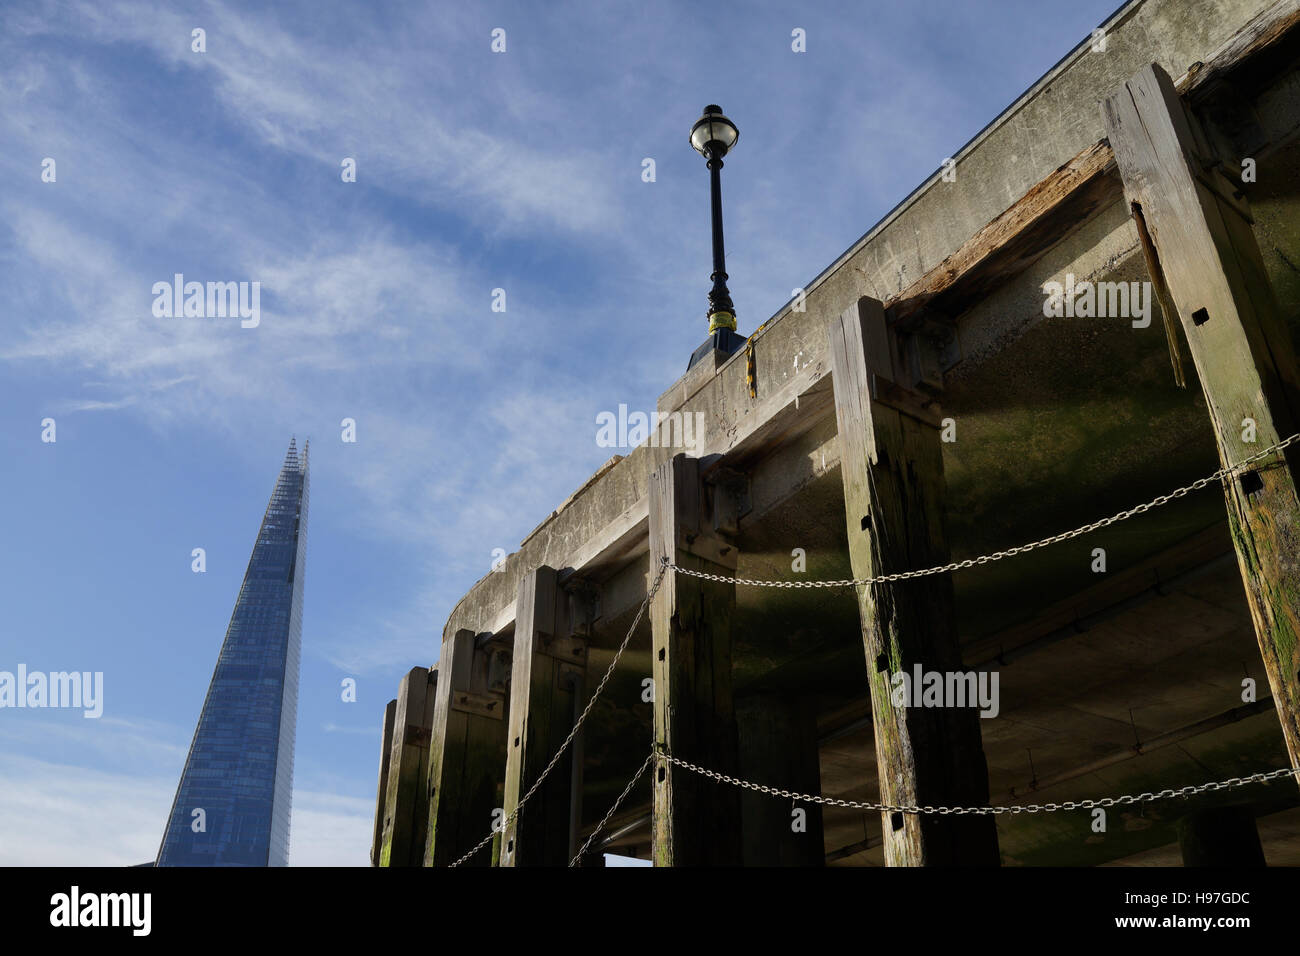 A quay on the Thames at low tide, with the Shard building visible. Stock Photo